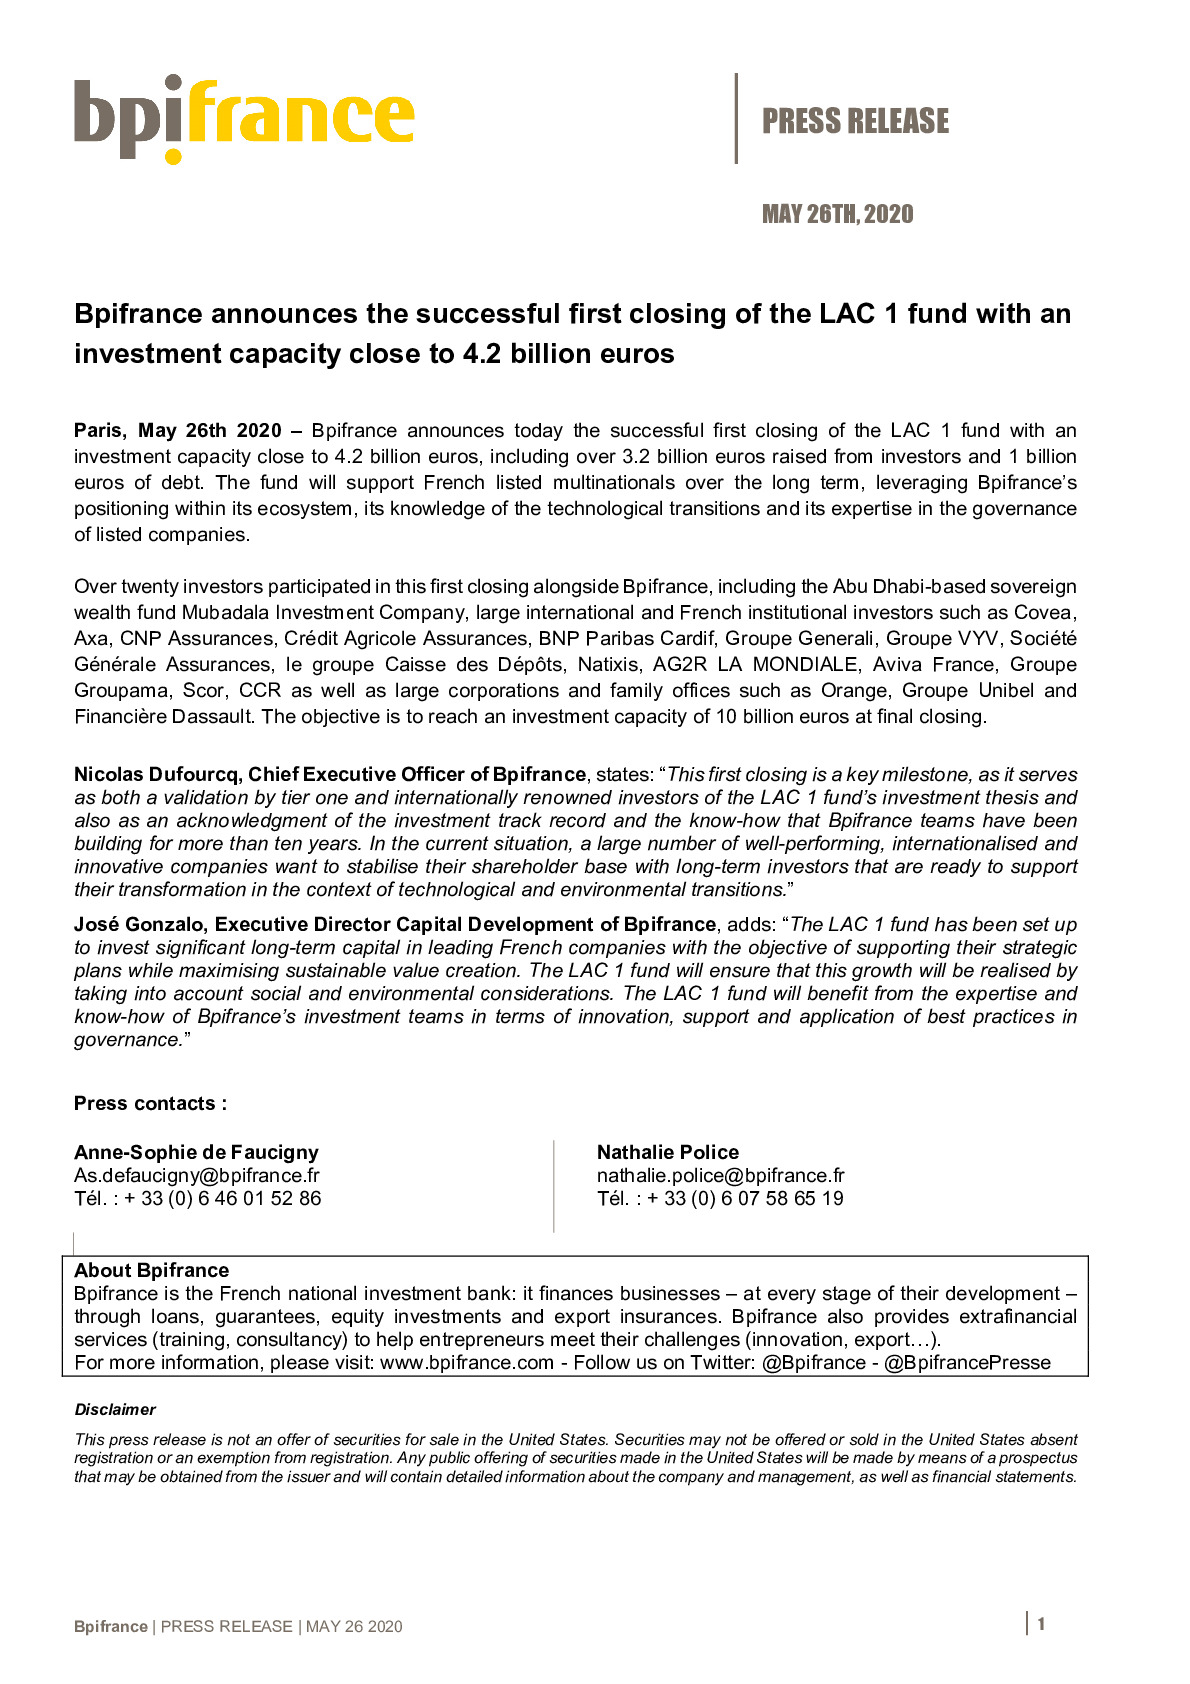 2020 05 26 – PR Bpifrance – First closing of the LAC 1 fund with an investment capacity close to 4-2 billion euros-pdf